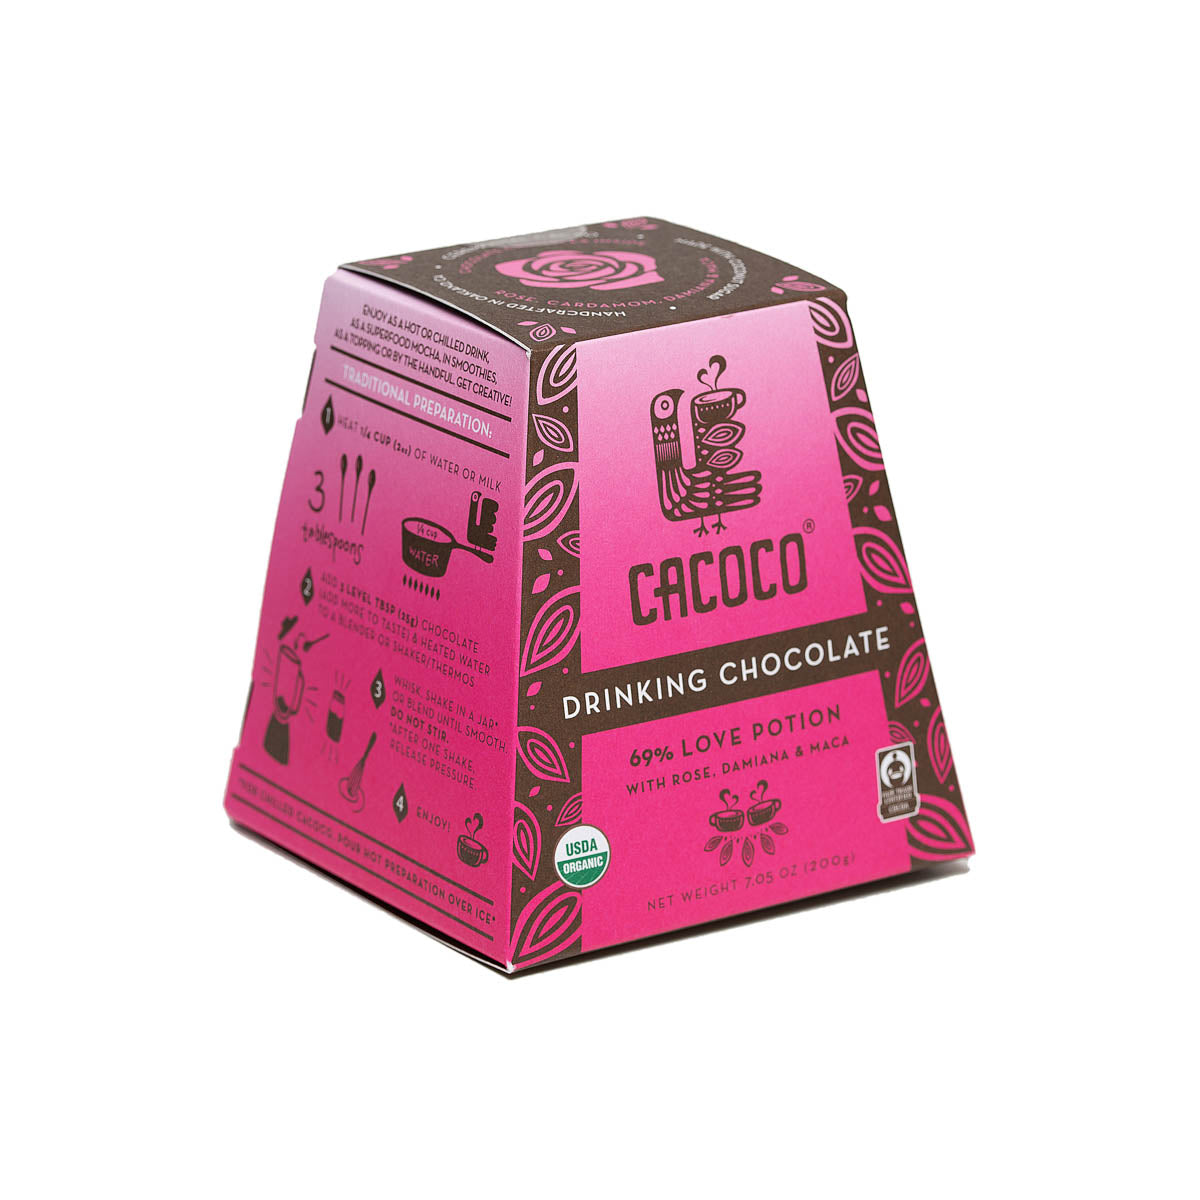 Love Potion Drinking Chocolate | Coracao | Raw Living UK | Coracao 69% Love Potion Drinking Chocolate is was created to inspire love, with Rose, Damiana &amp; Maca. The heirloom cacao is harvested from Ecuadorian farms.